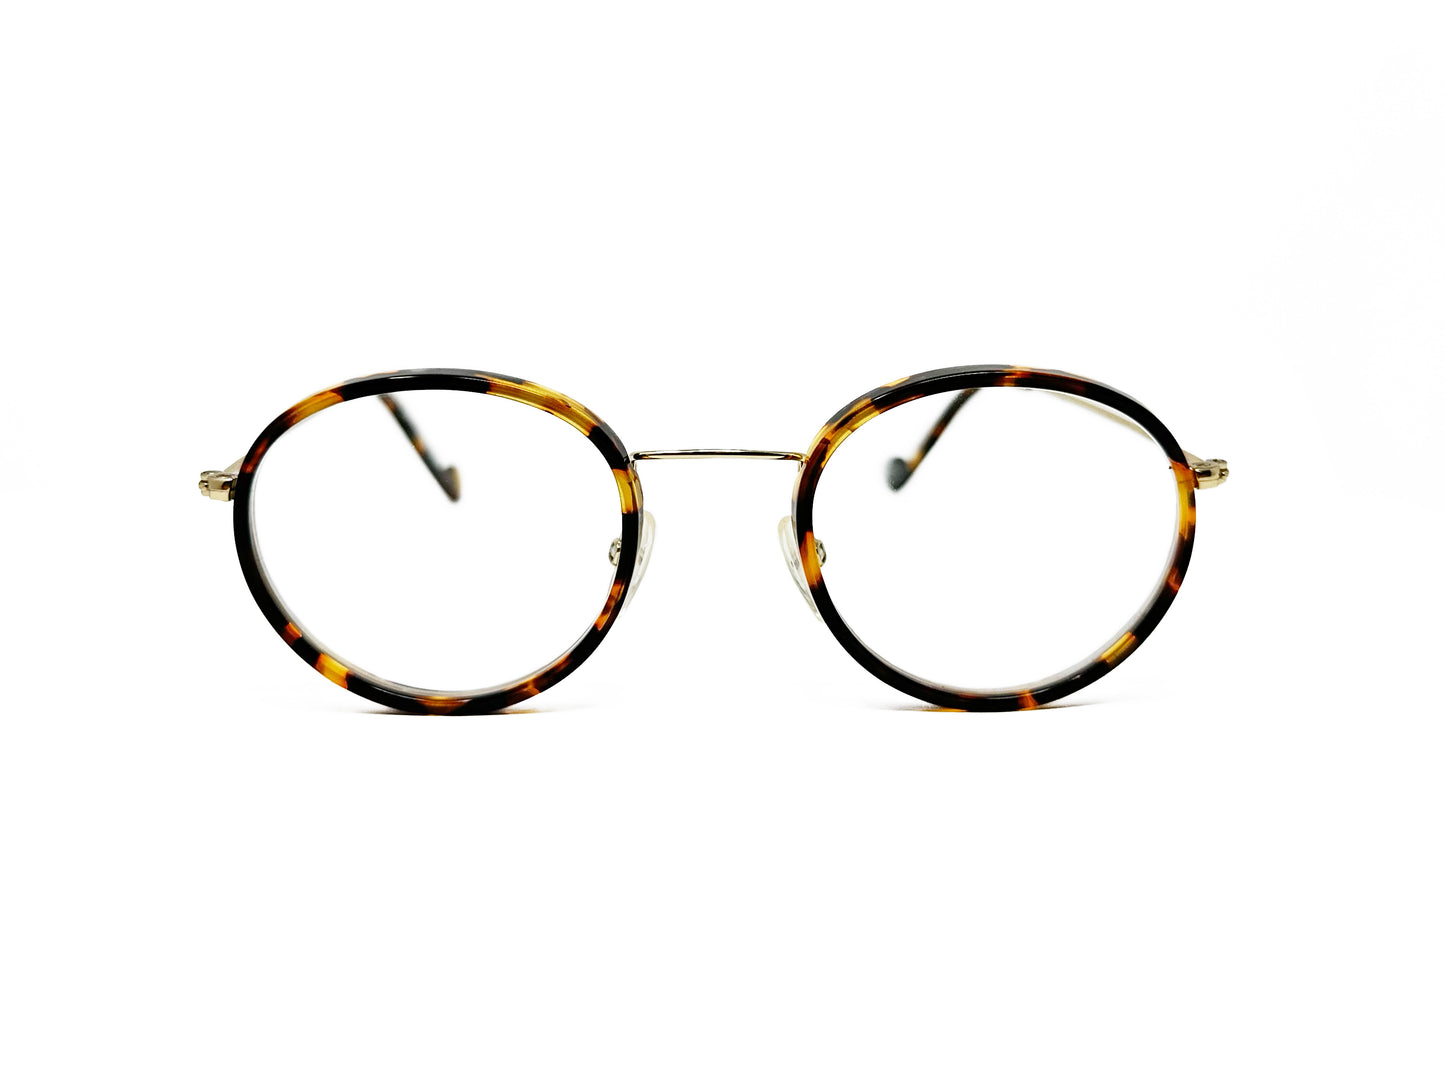 XIT pantos optical frame. Acetate lining on front with metal temples. Model: M151. Color: 133 - Tortoise with gold metal. Front view. 